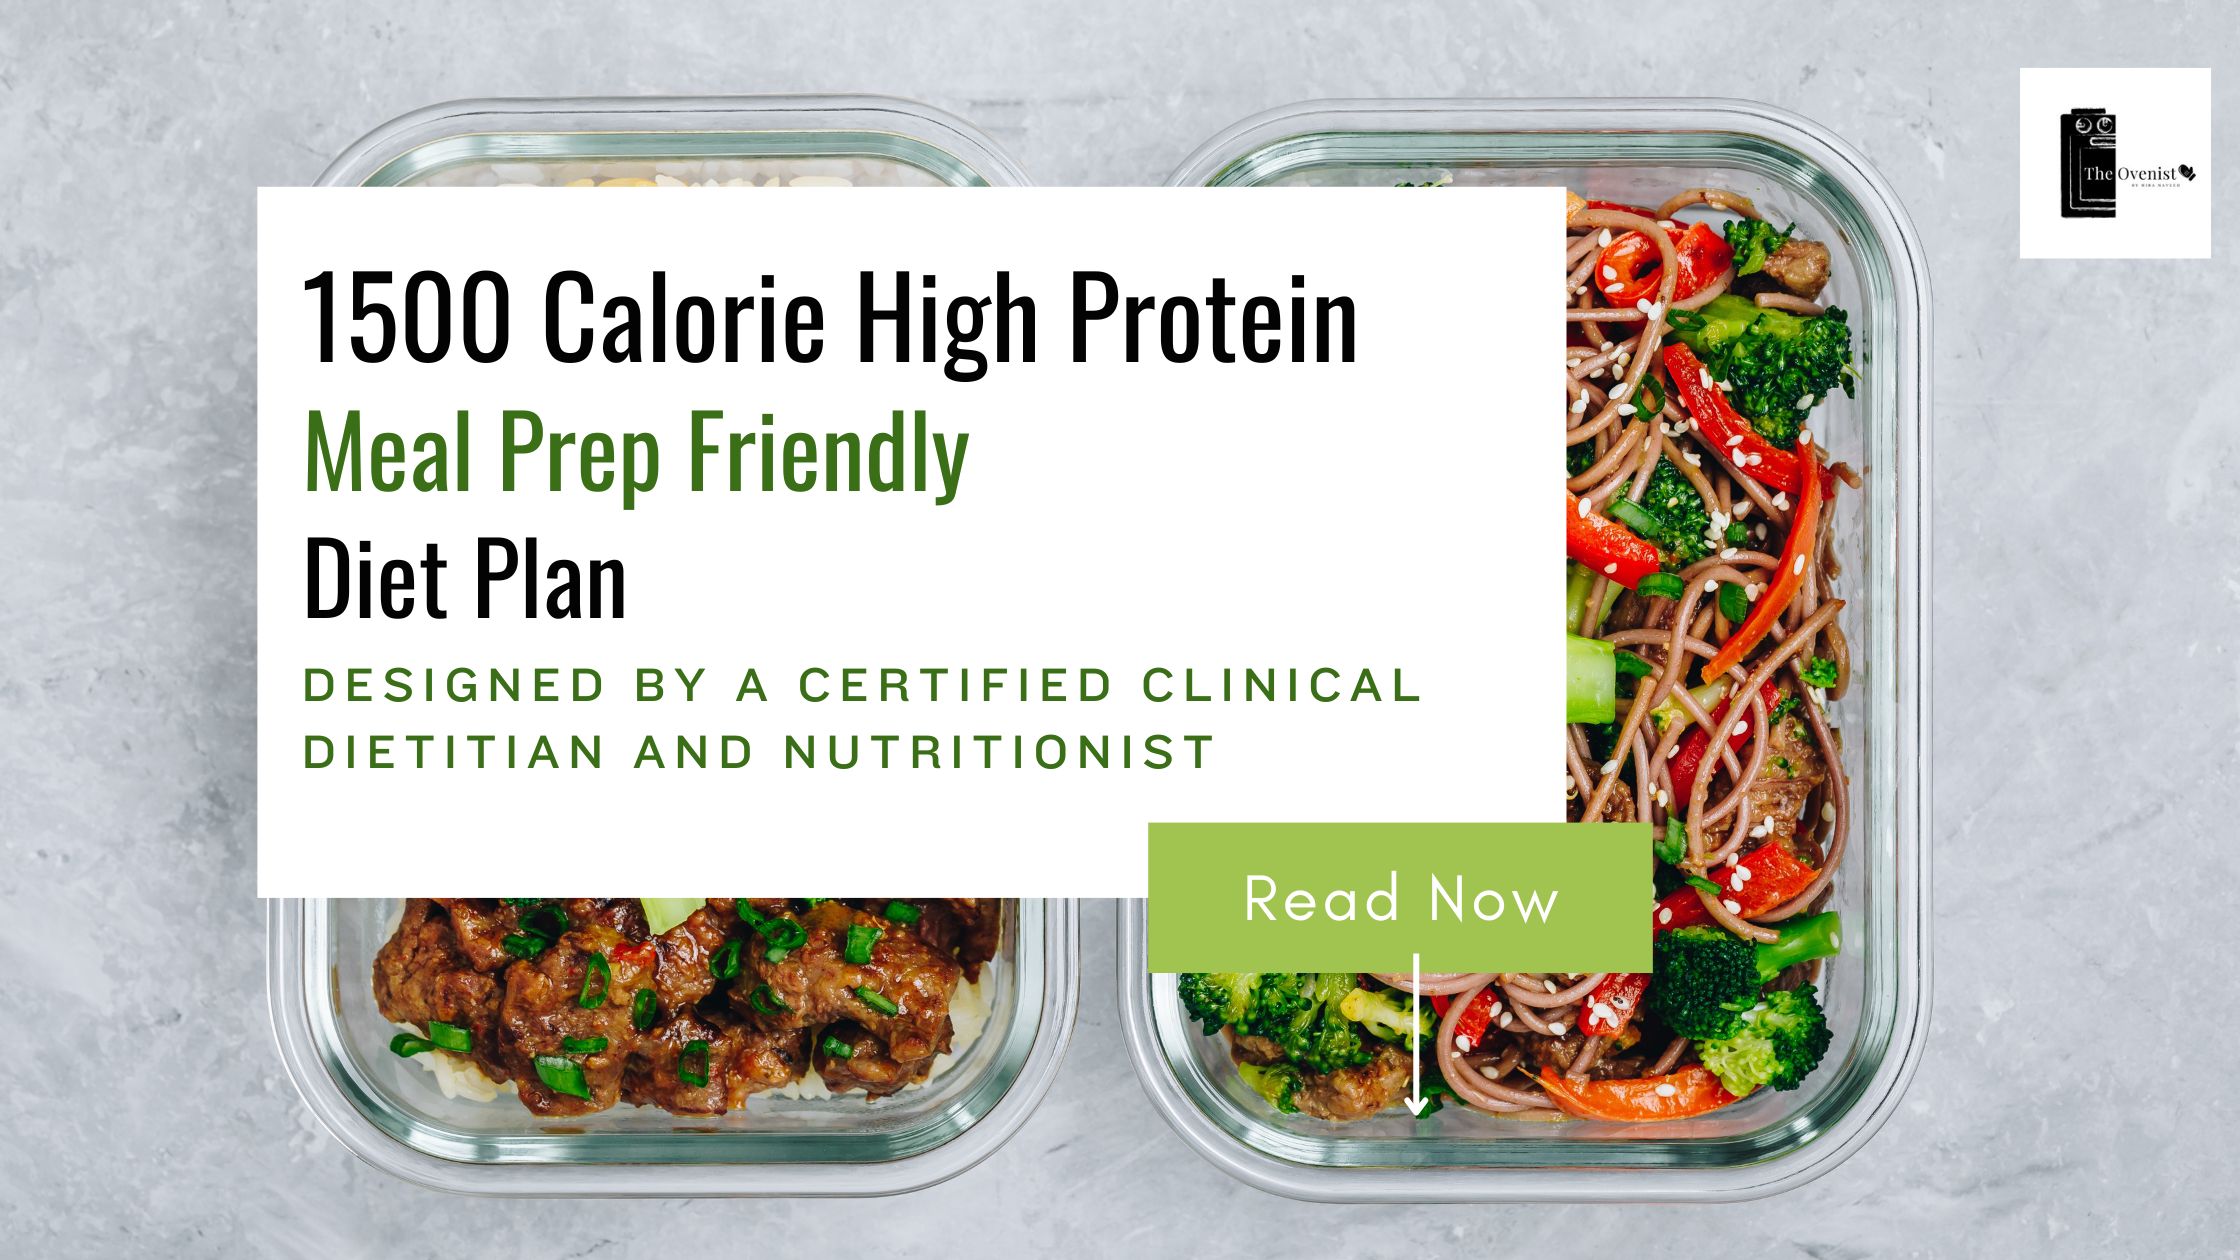 1500 Calorie Diet Plan: How To Meal Prep For Weight Loss